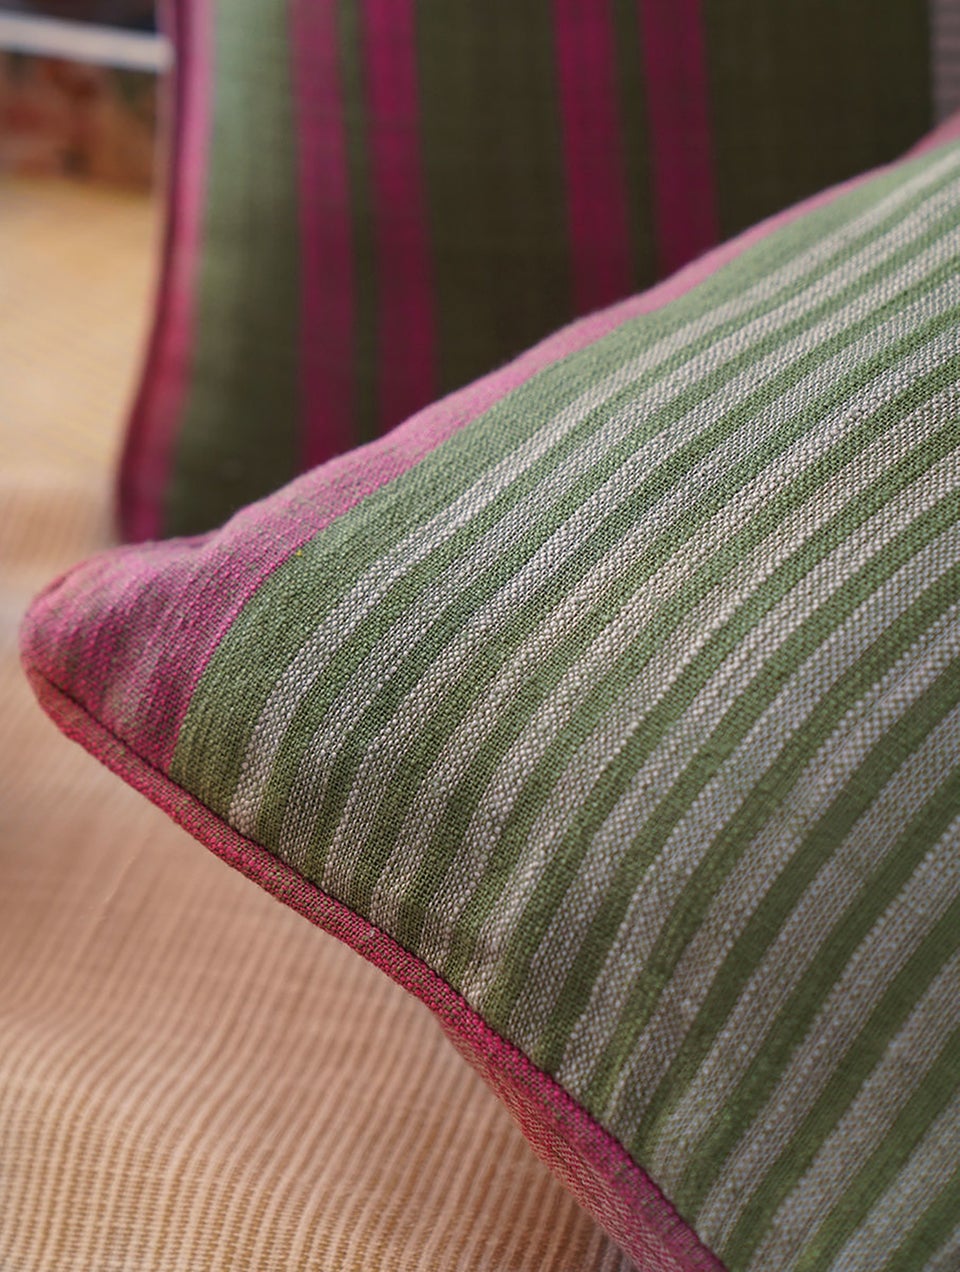 Handwoven Cushion Cover